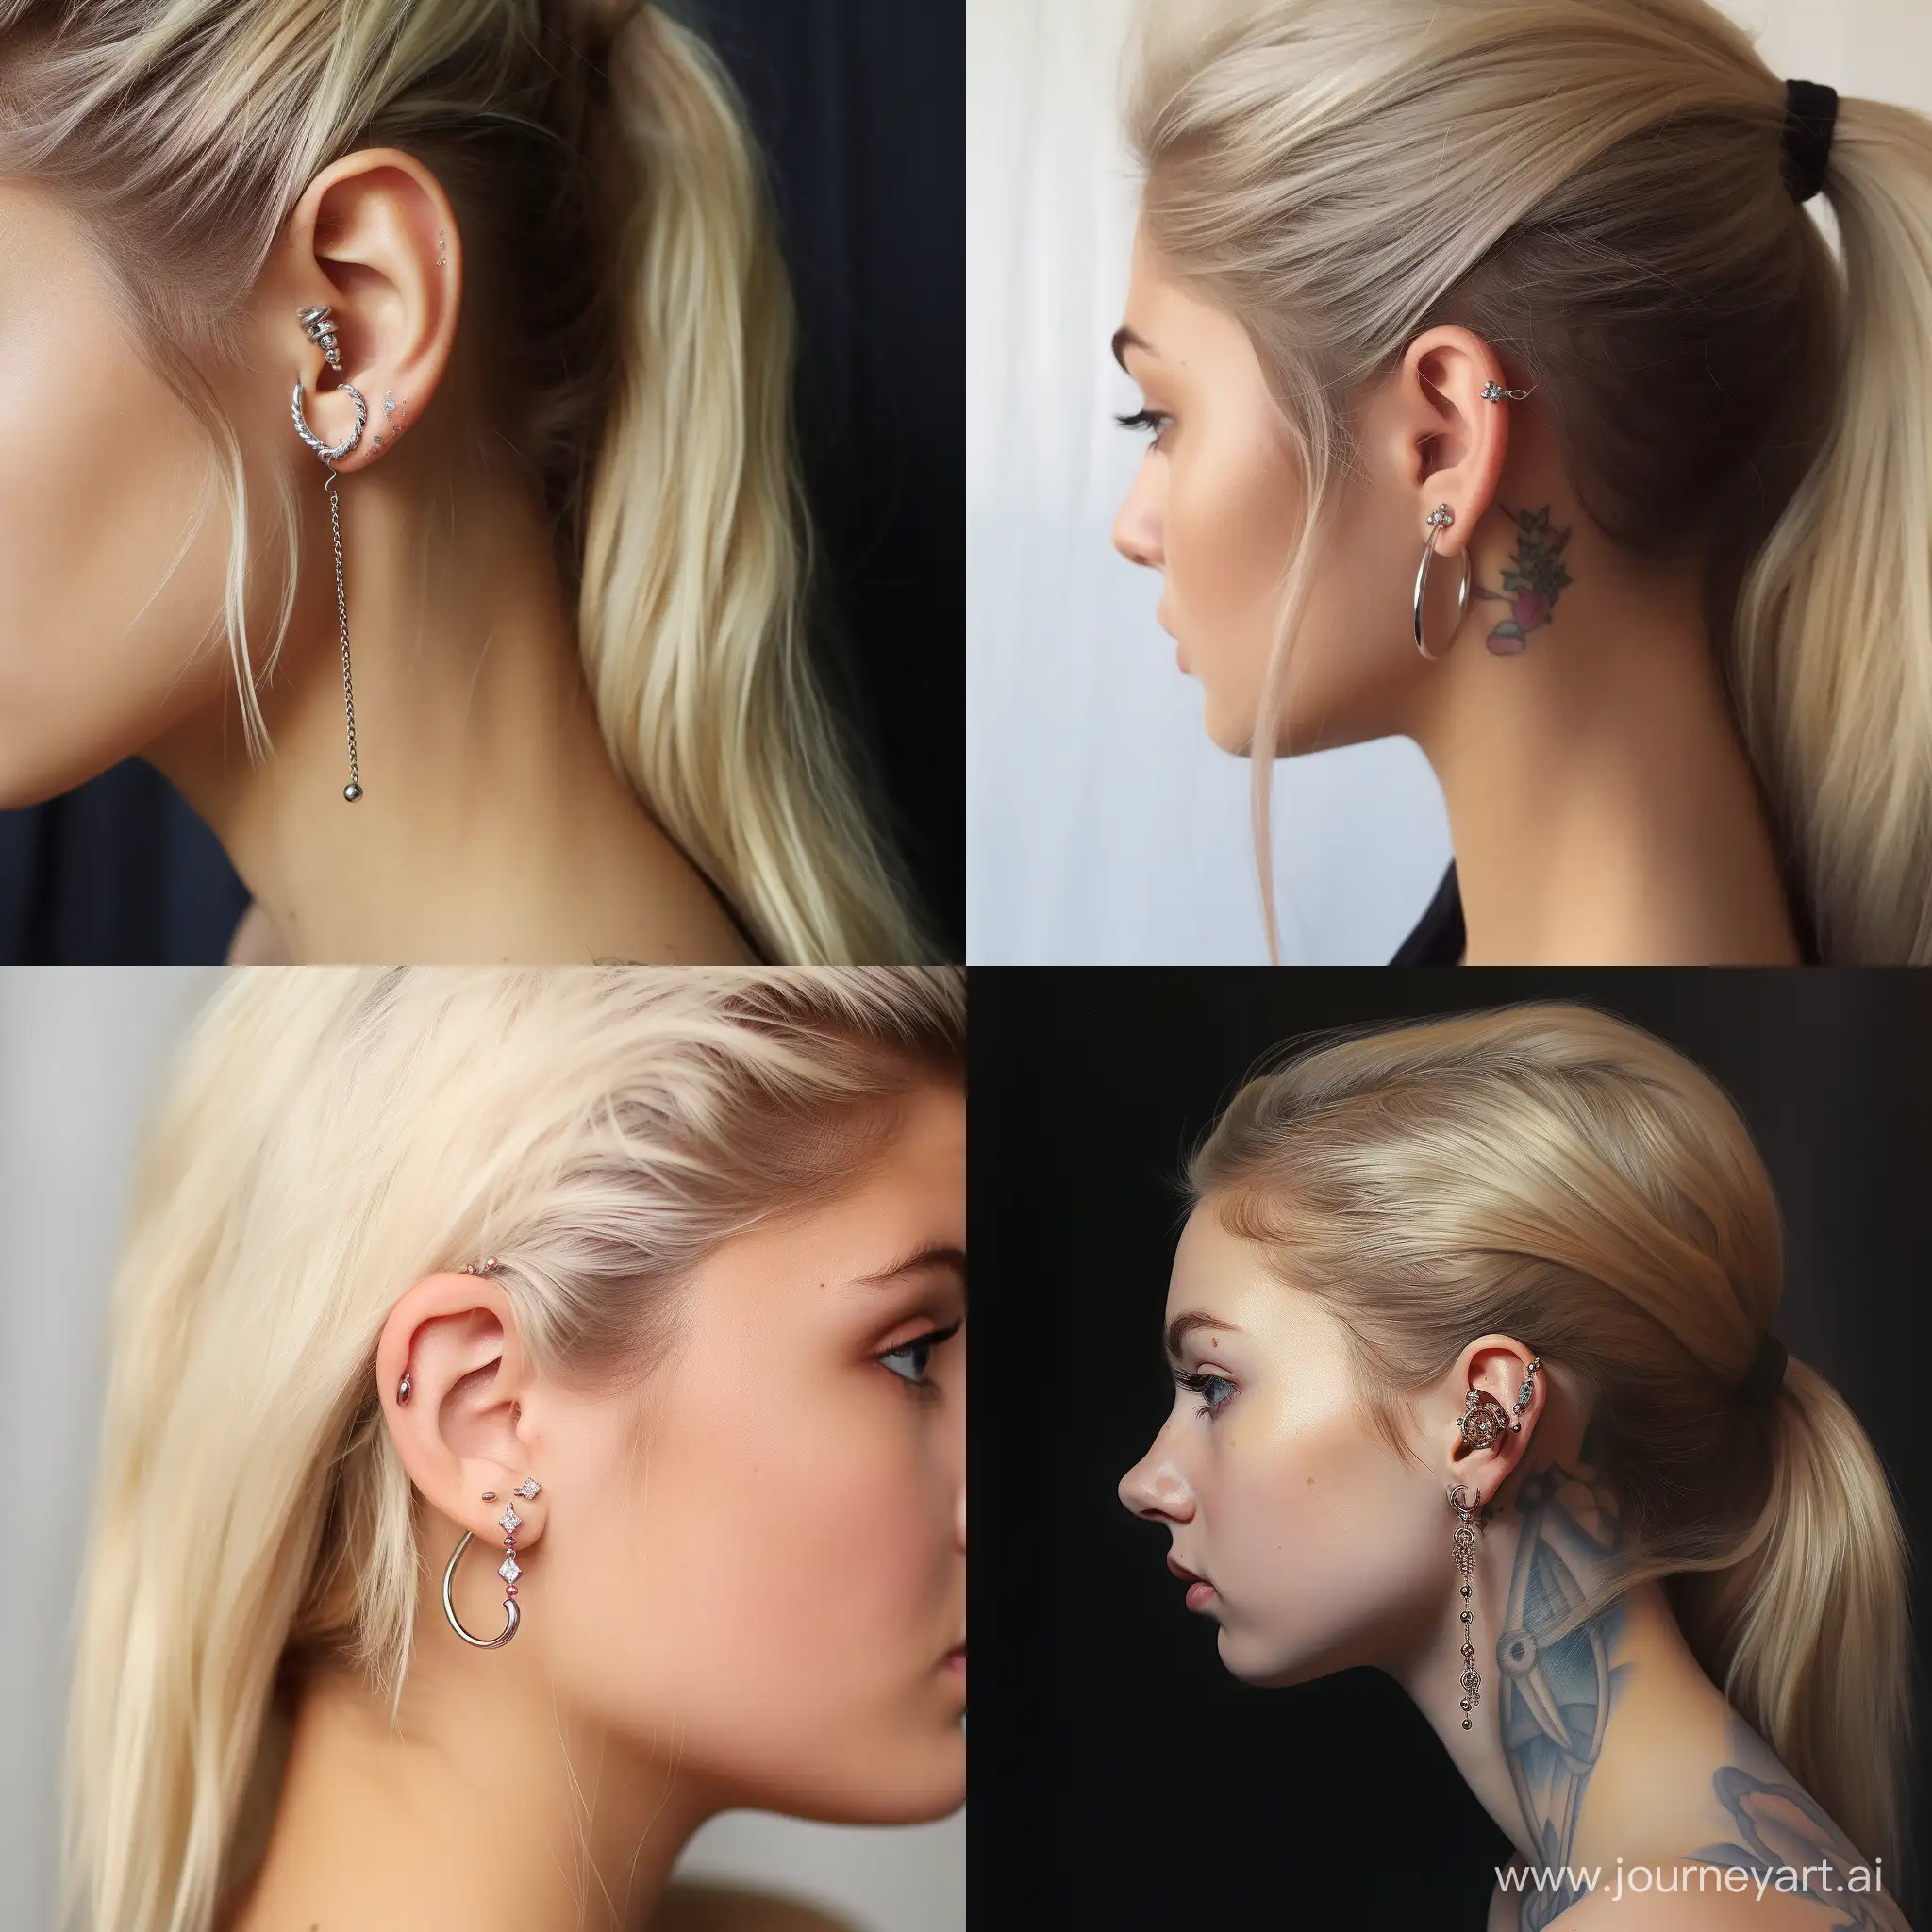 Captivating-Ear-Piercing-Artistry-with-AR-Enhancement